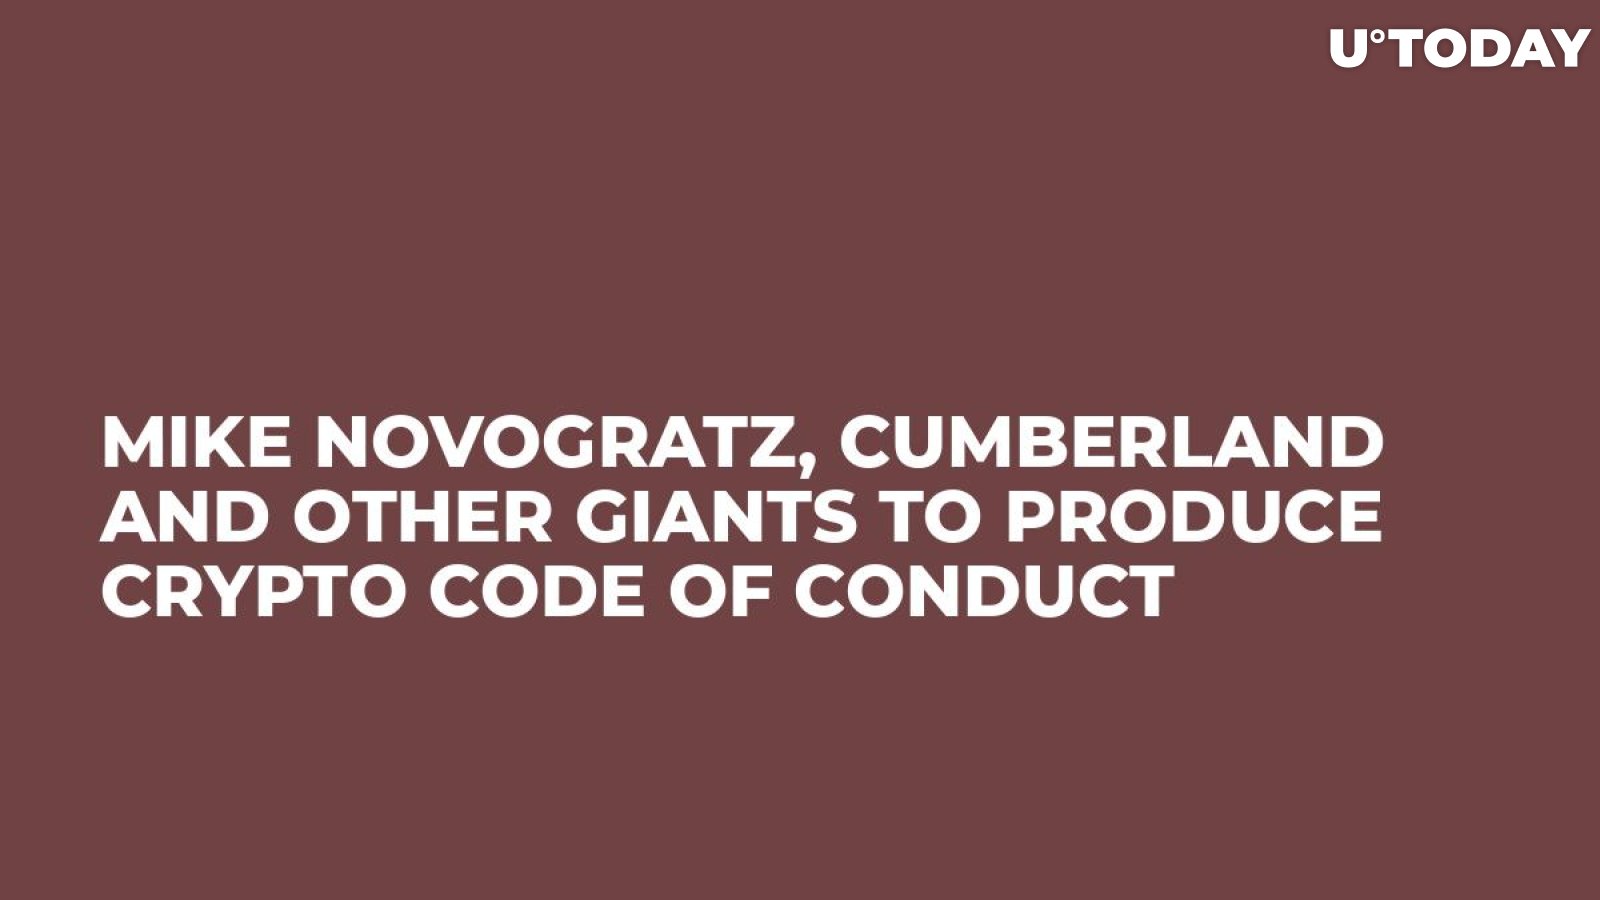 Mike Novogratz, Cumberland and Other Giants to Produce Crypto Code of Conduct